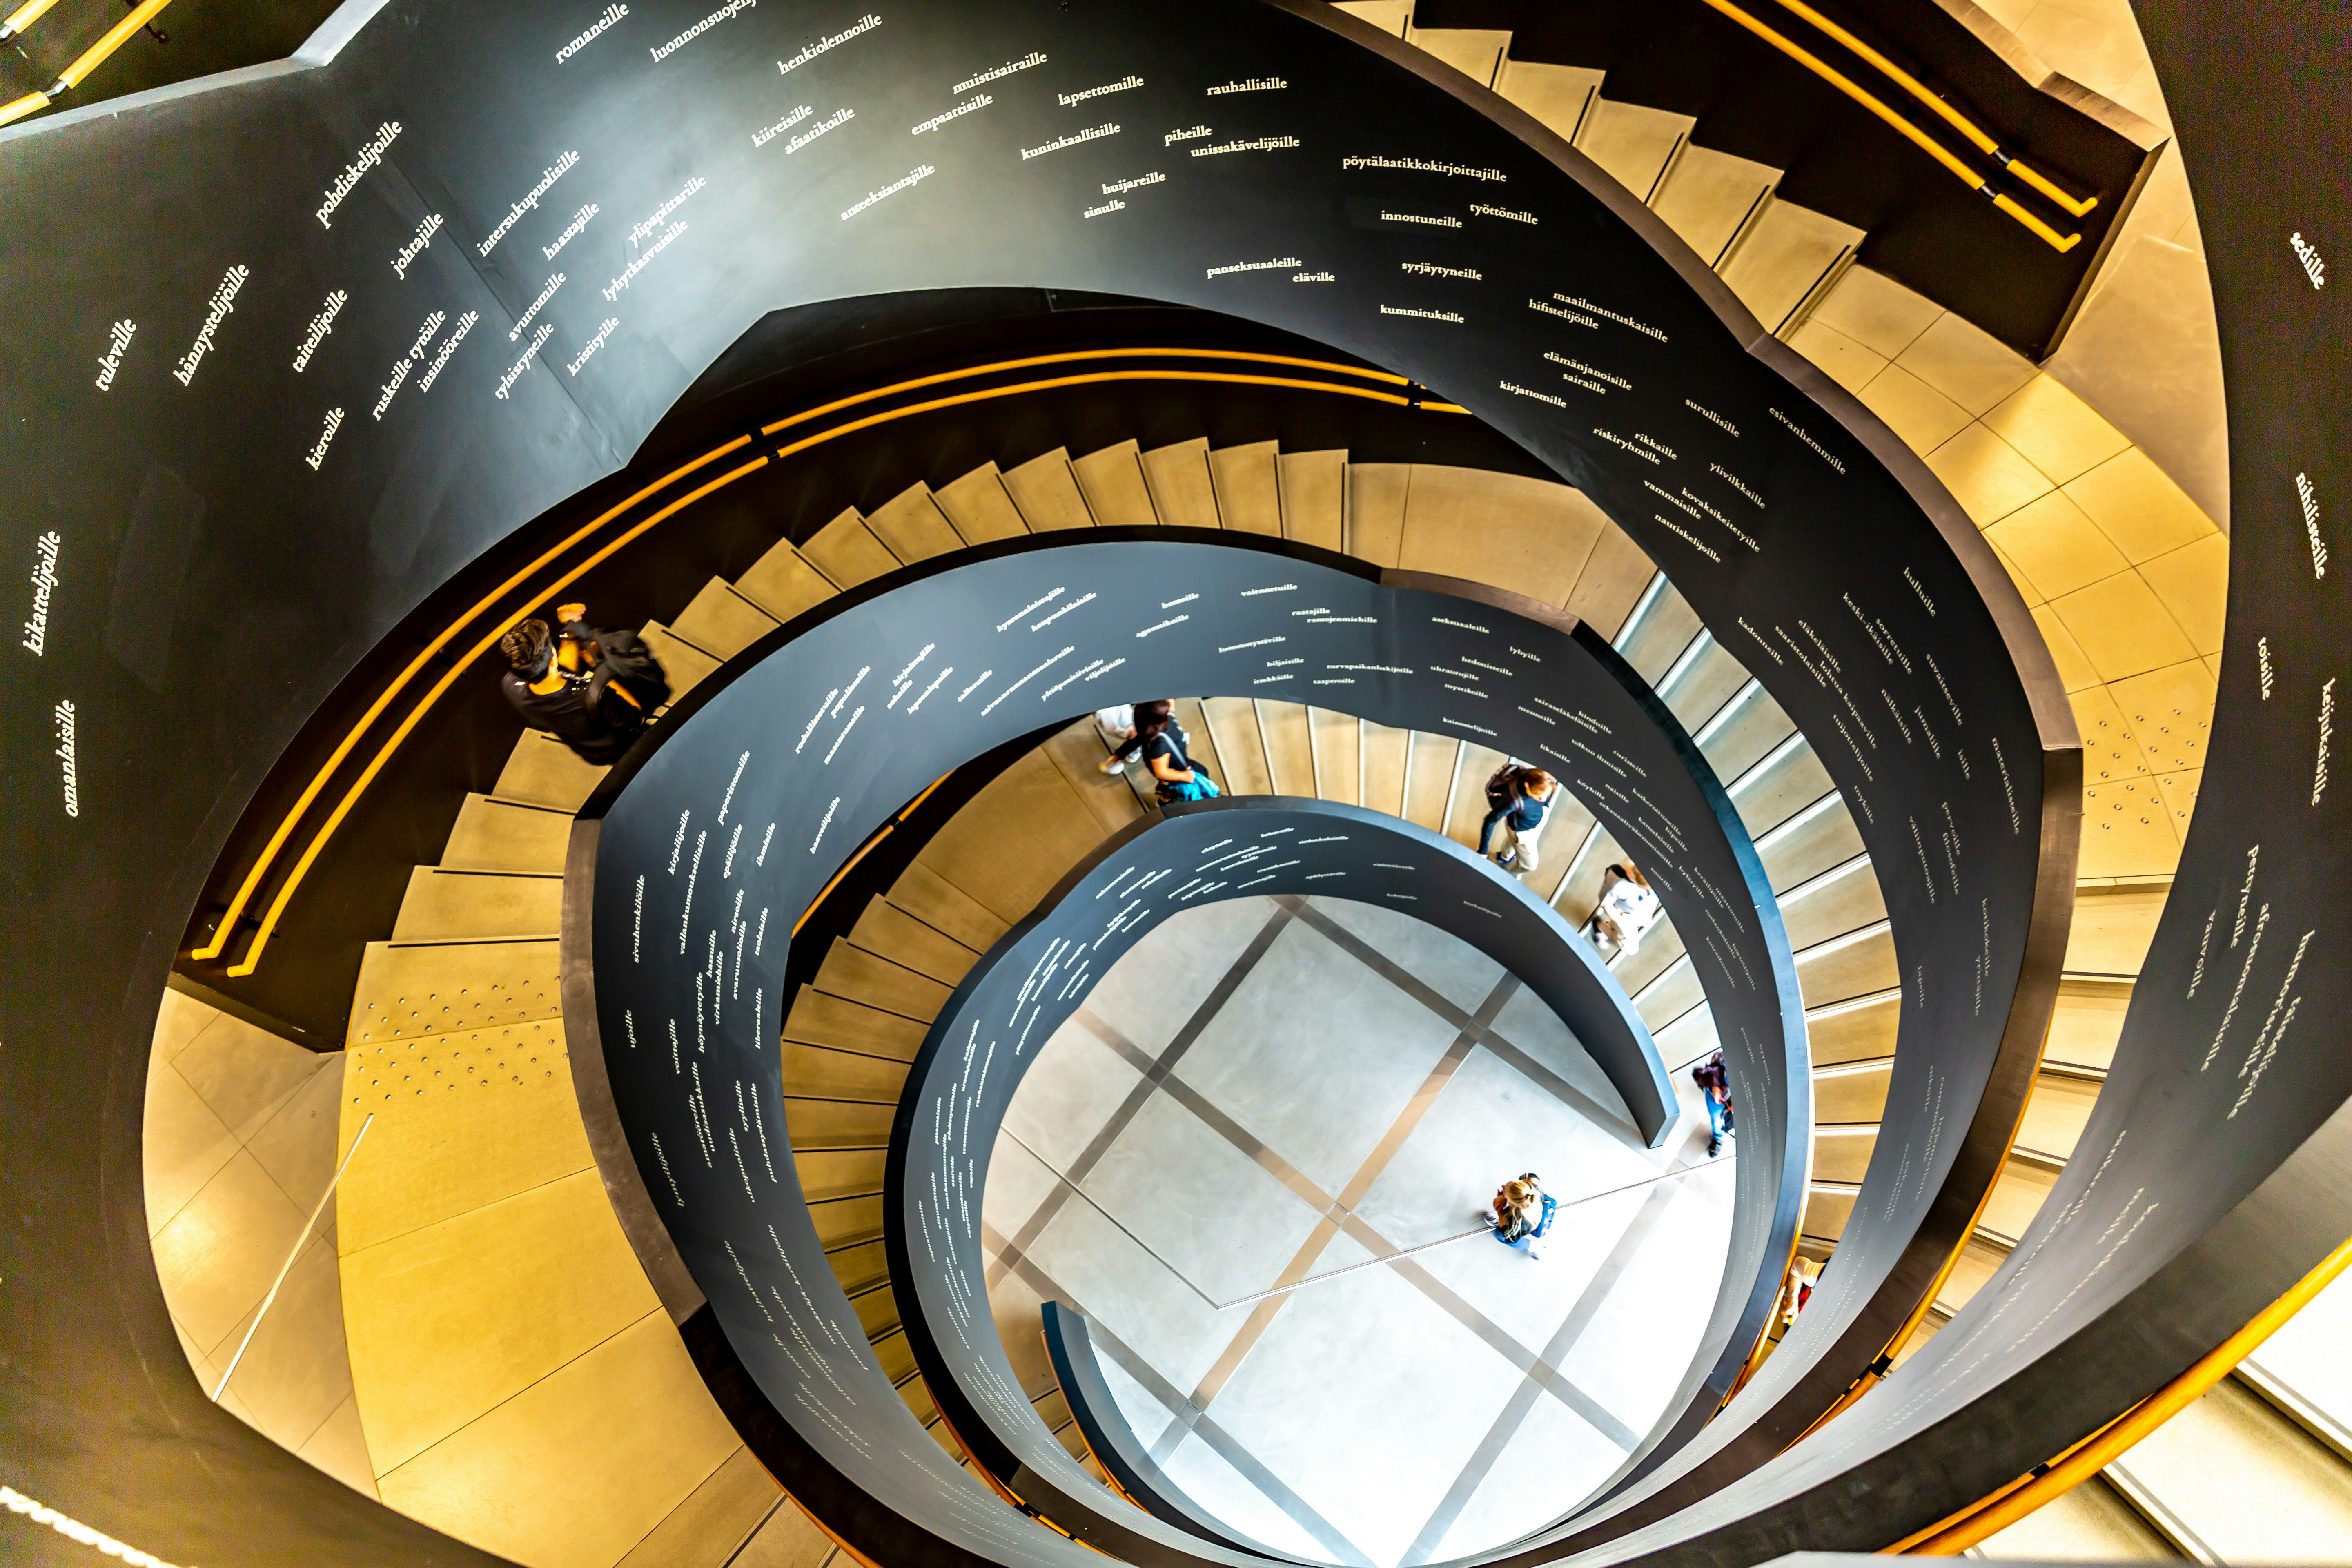 A winding stair in the interior of the New Helsinki city library, which is called Oodi. People are walking up and down the stair, and writing is visible on its inside. 